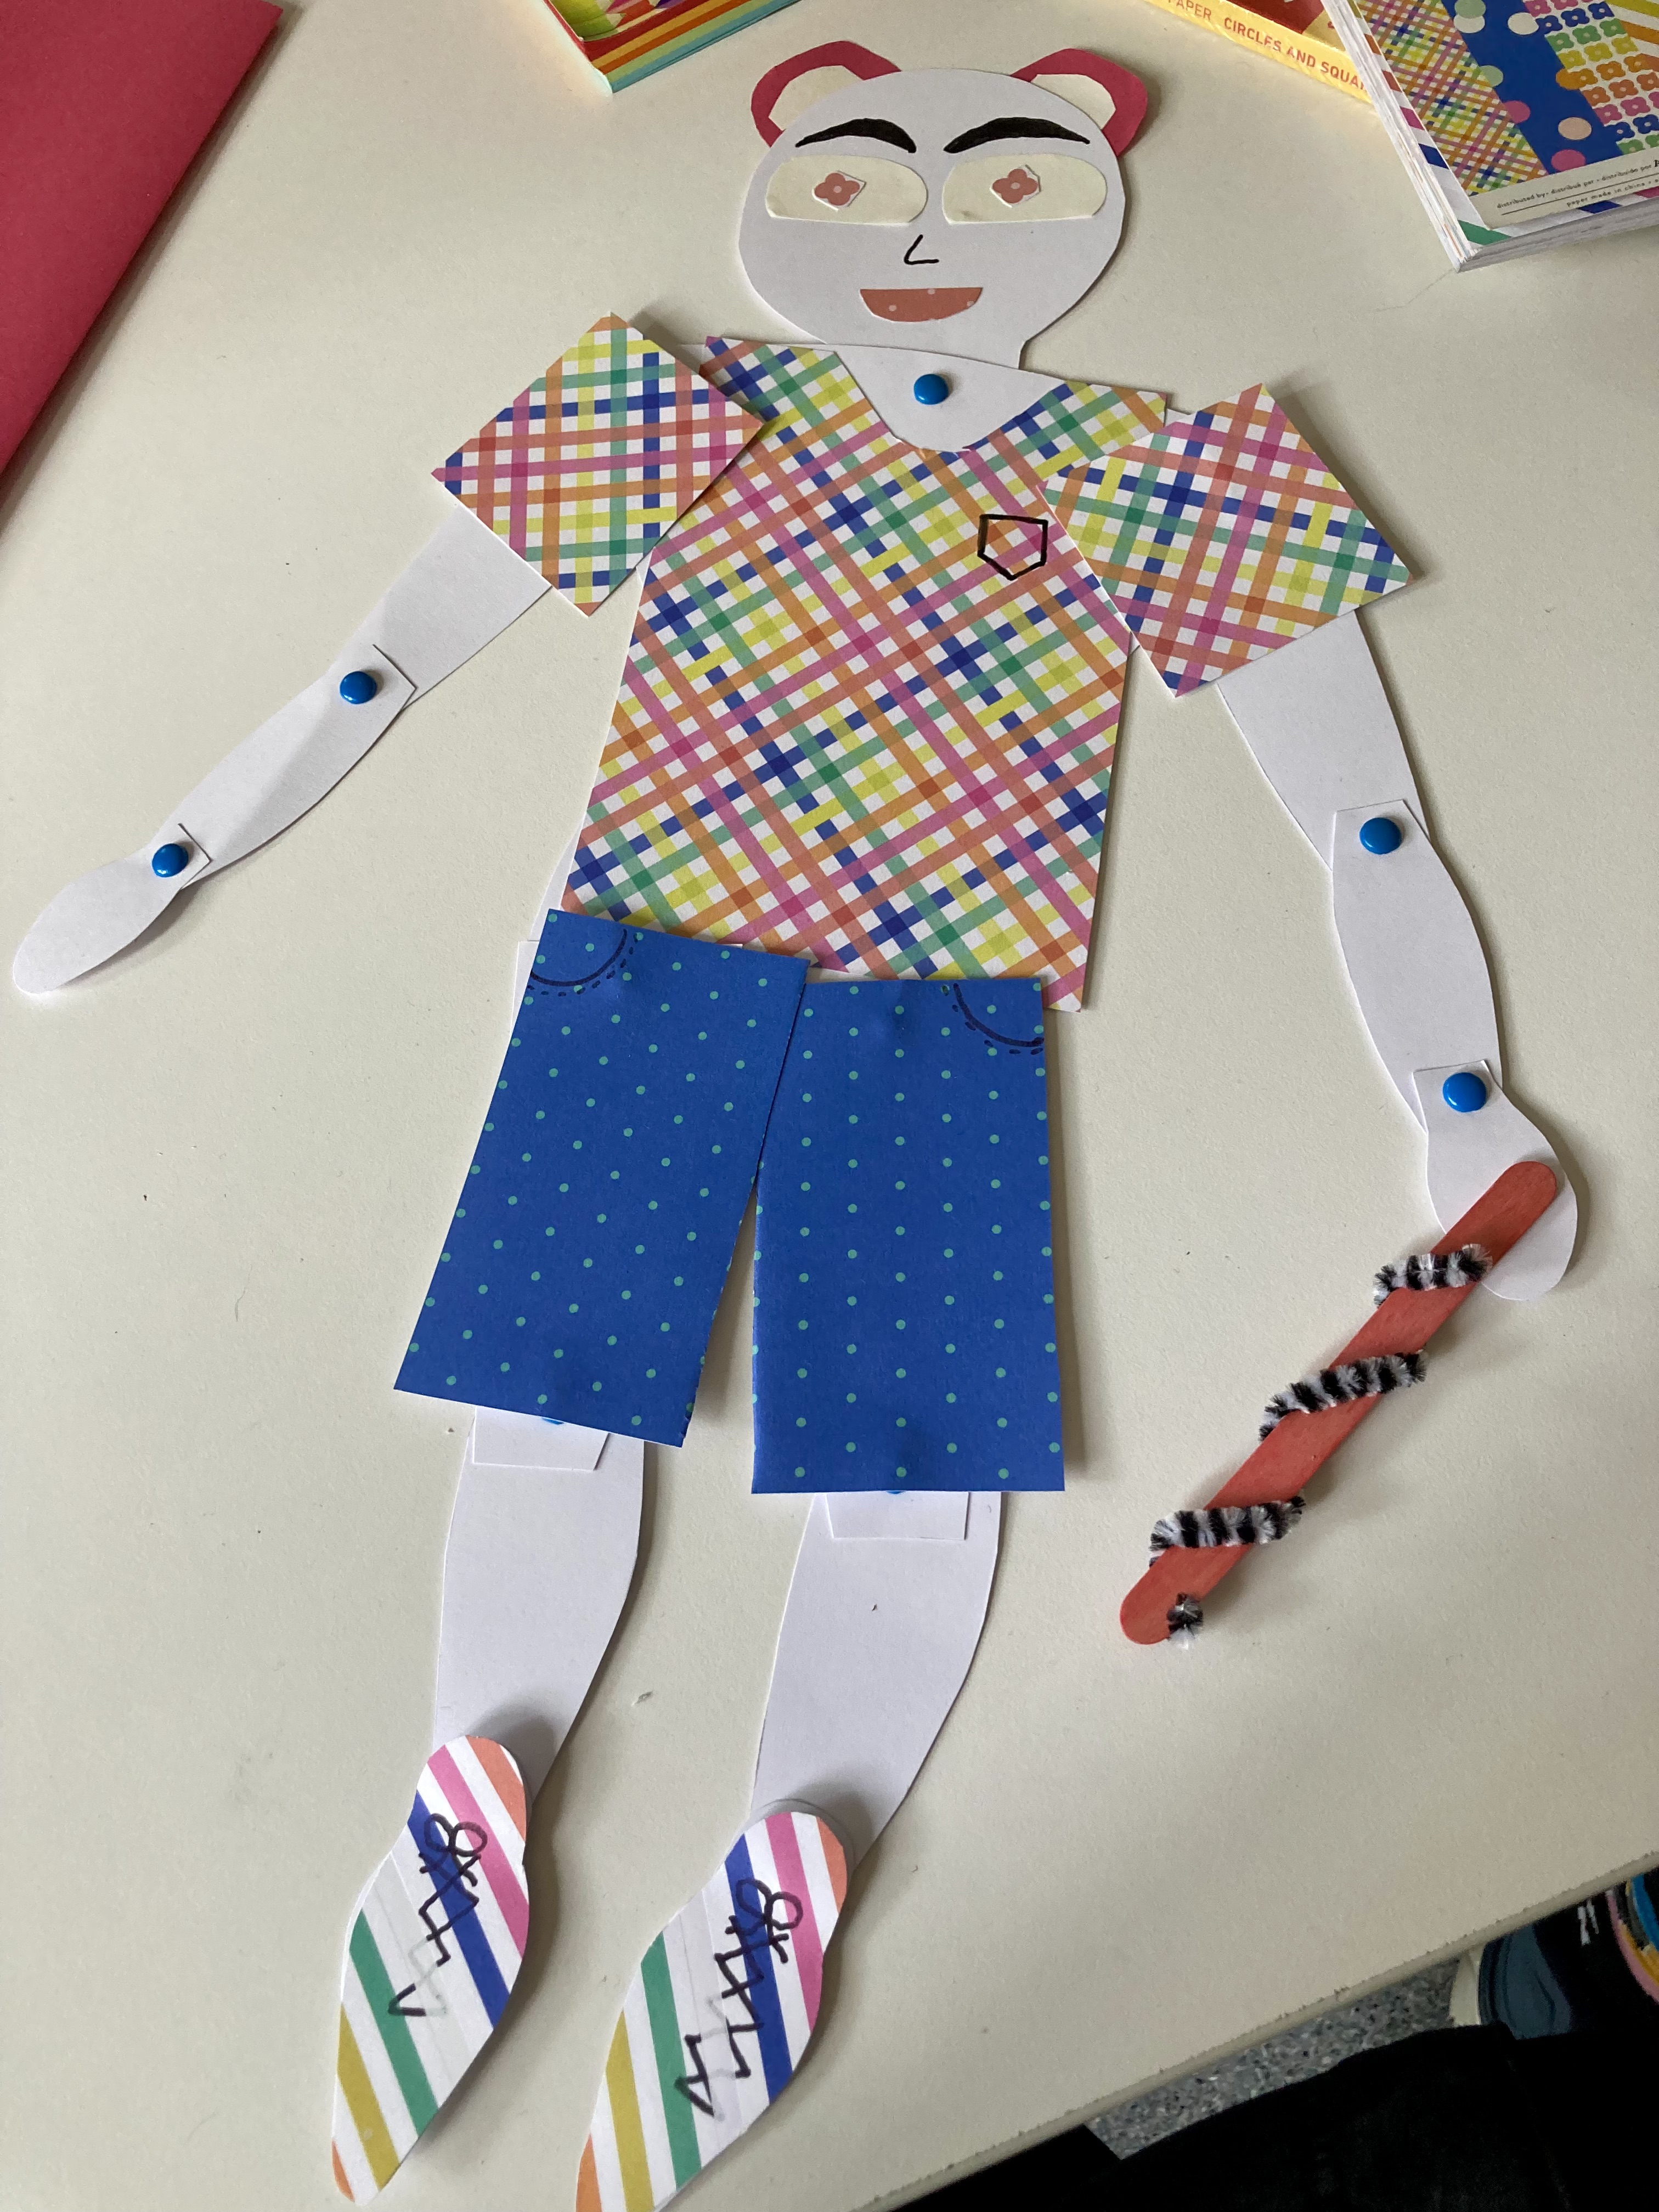 A jointed puppet wearing a rainbow plaid shirt, blue spotty shorts and a pair of pink bear ears. They are carrying a walking stick make out of a popsicle stick with a pipecleaner wrapped around it.